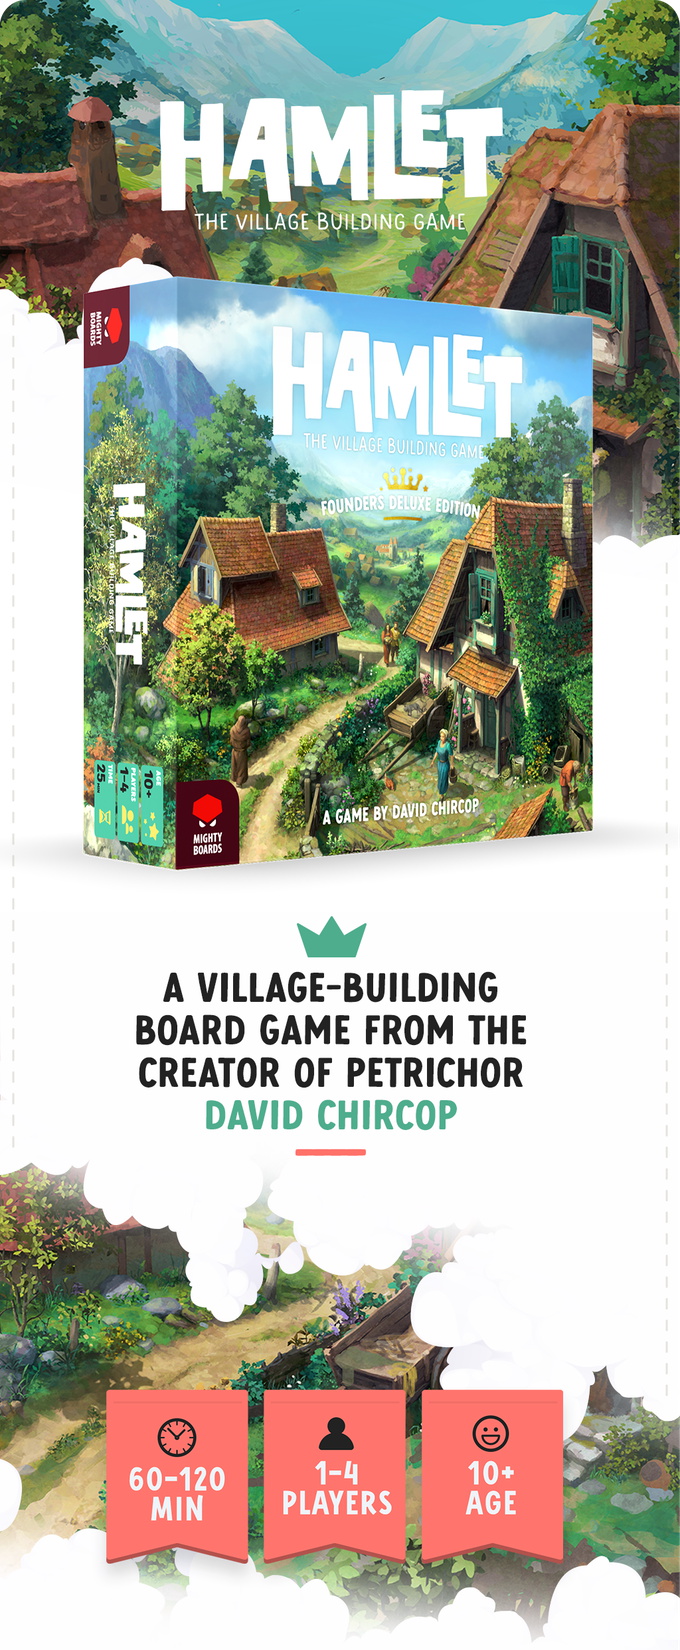 Hamlet: The Village Building Game (KS Founder's Deluxe Edition 